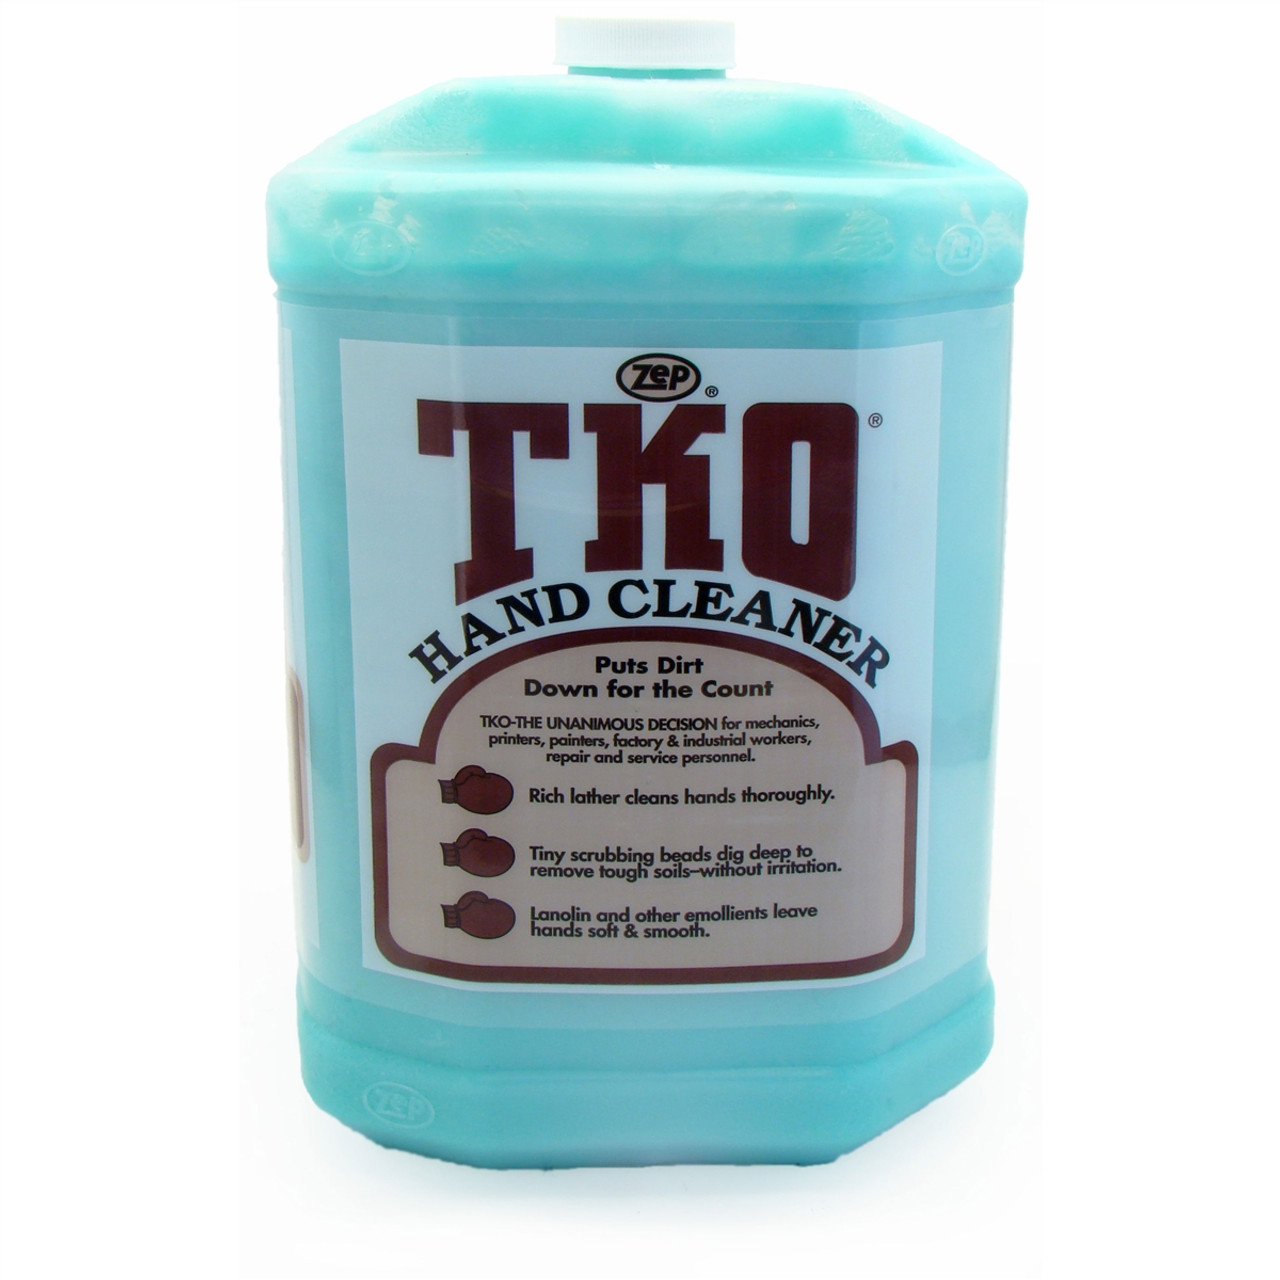 Zep TKO Hand Cleaner - Lemon Lime ScentFor - 1 gal (3.8 L) - Dirt Remover,  Grime Remover, Grease Remover - Hand - Blue, Opaque - Heavy Duty,  Solvent-free, Non-flammable - 1 Each